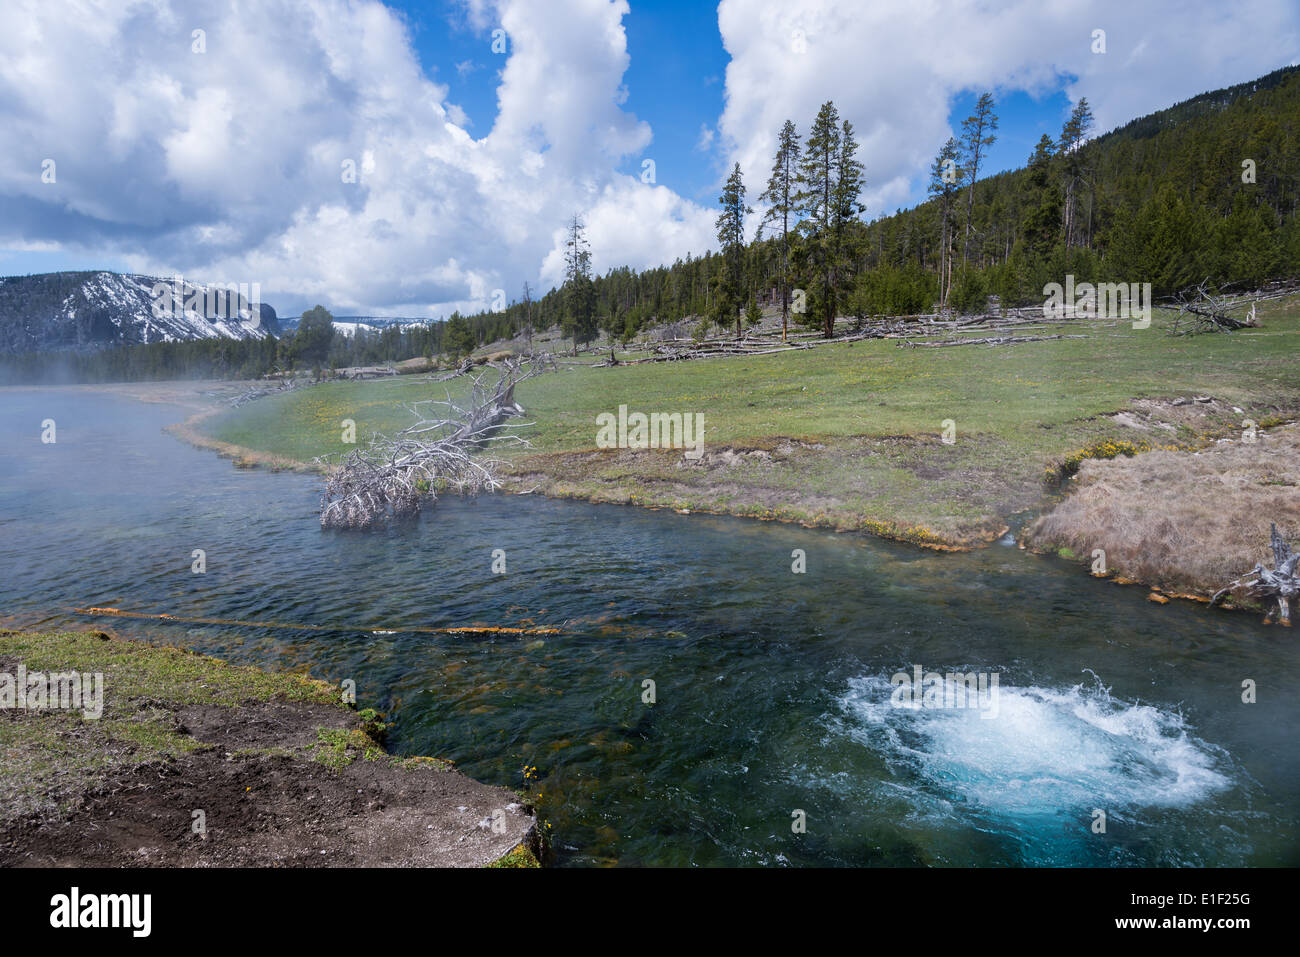 Hot spring feeds into a river. Yellowstone National Park, Wyoming, USA. Stock Photo